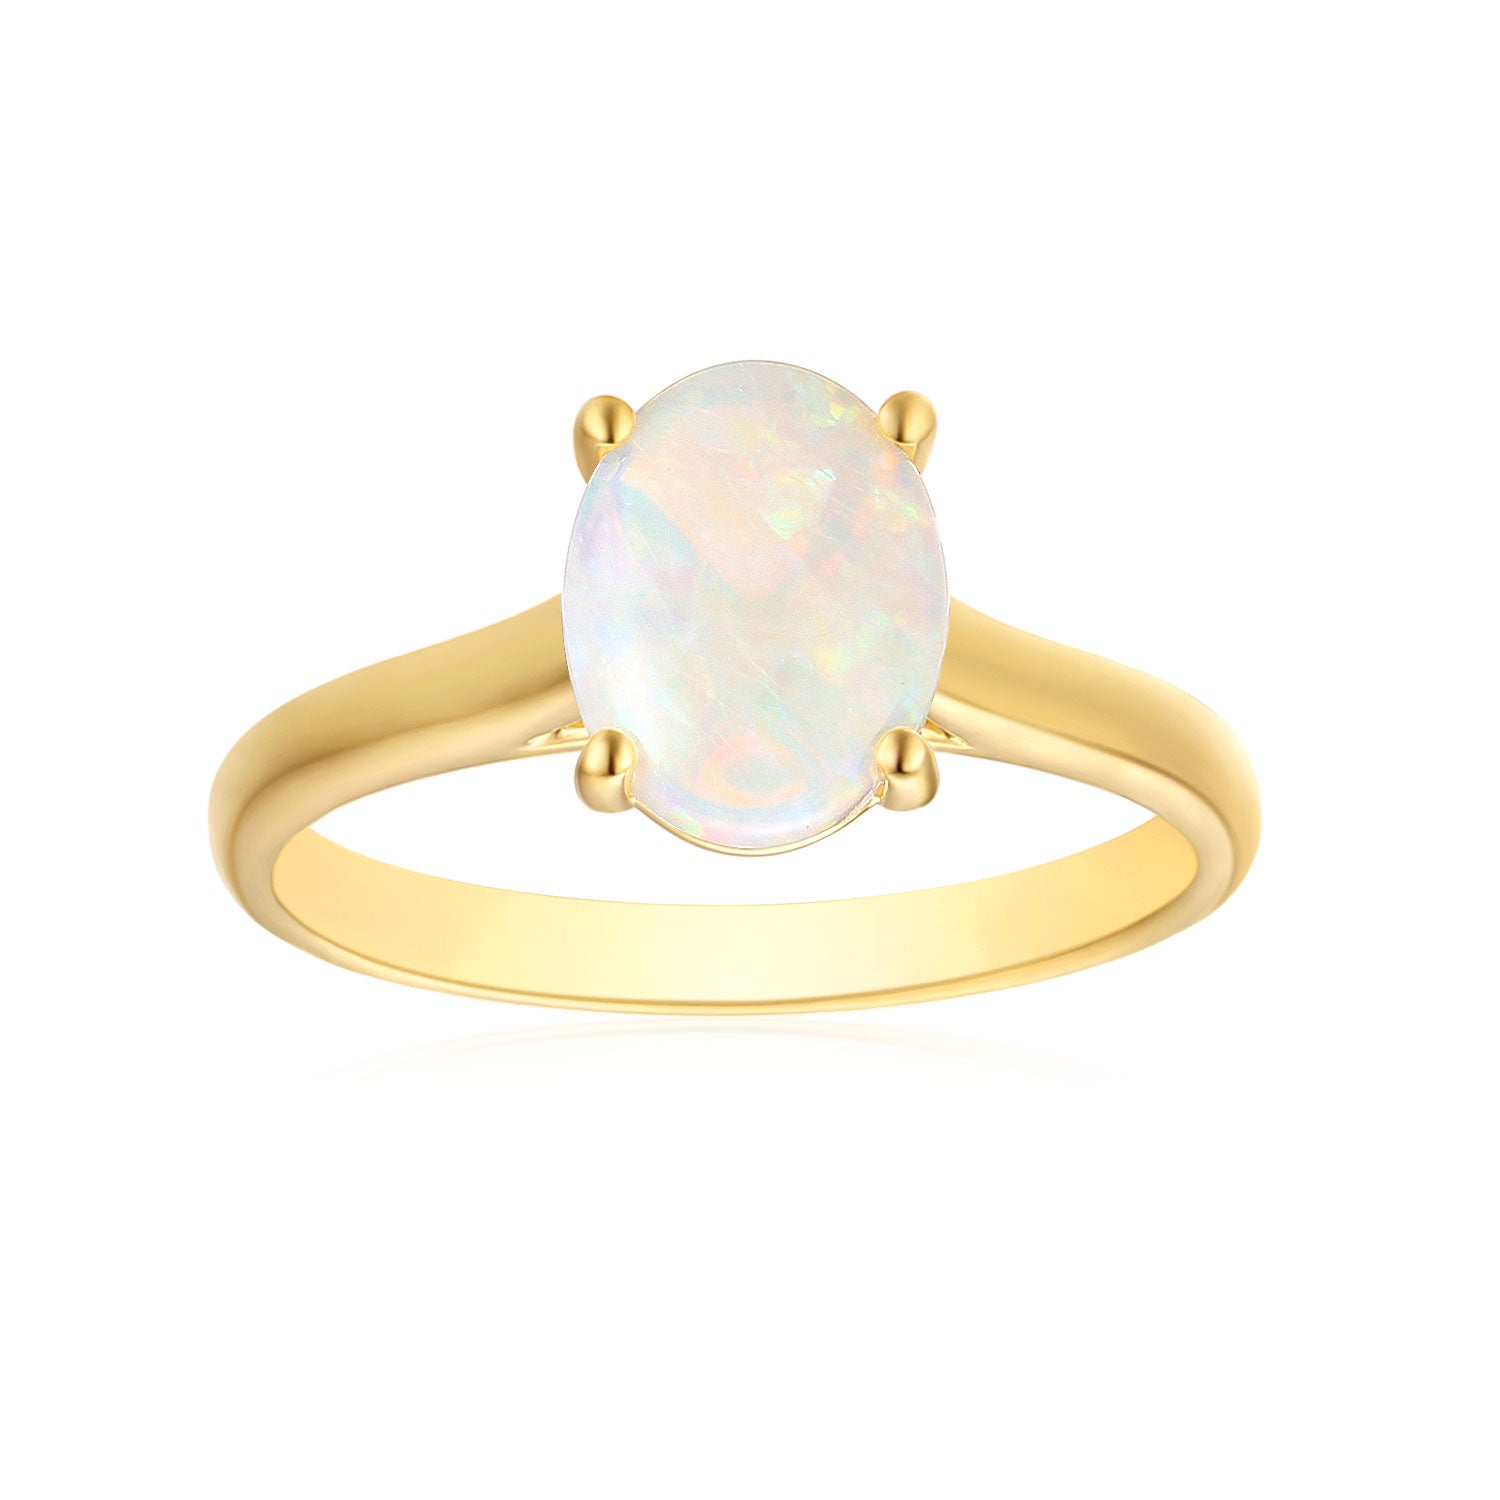 YDD 10K Gold Opal Rings for women 2 Carat(2 CT) Halo Pear Cut Opal  Engagement Rings for Women Opal Birthstone Anniversary Ring Free Engraved  Size 4 | Amazon.com